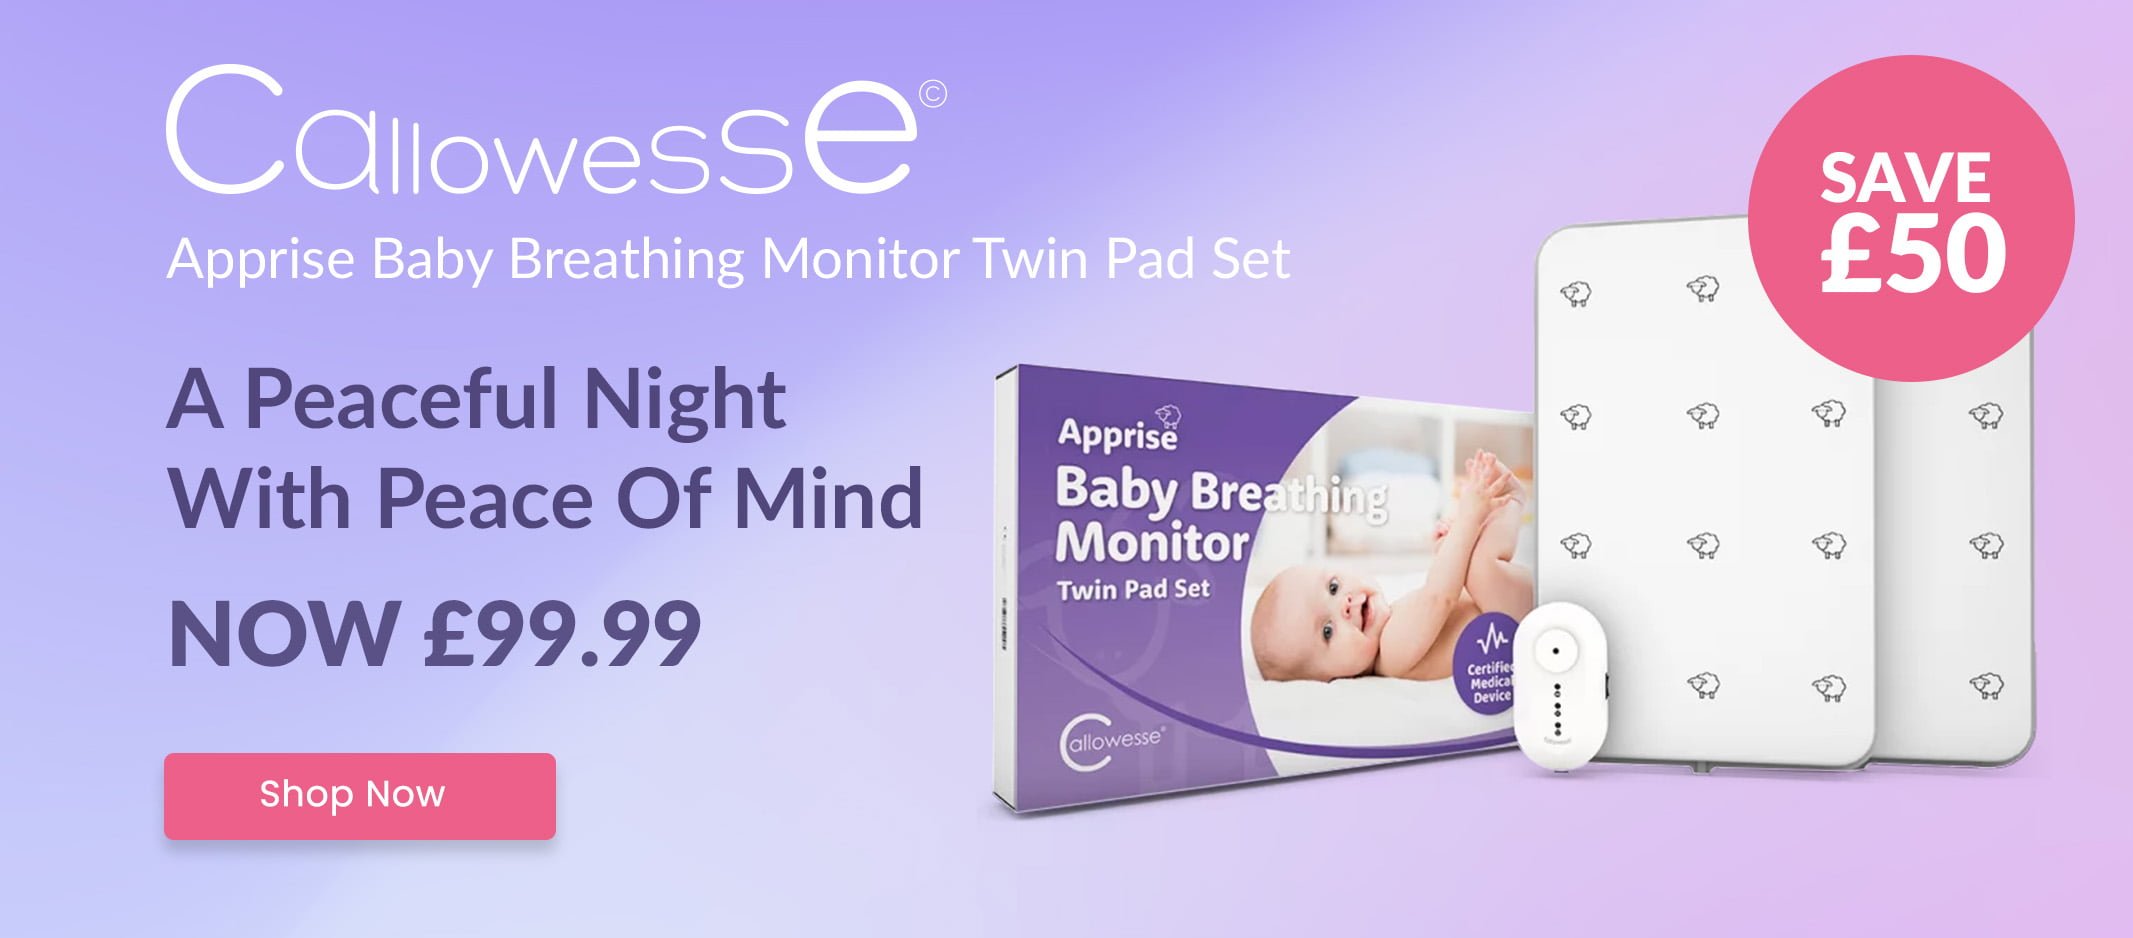 Callowesse Apprise Baby Breathing Monitor Twin Pad Set